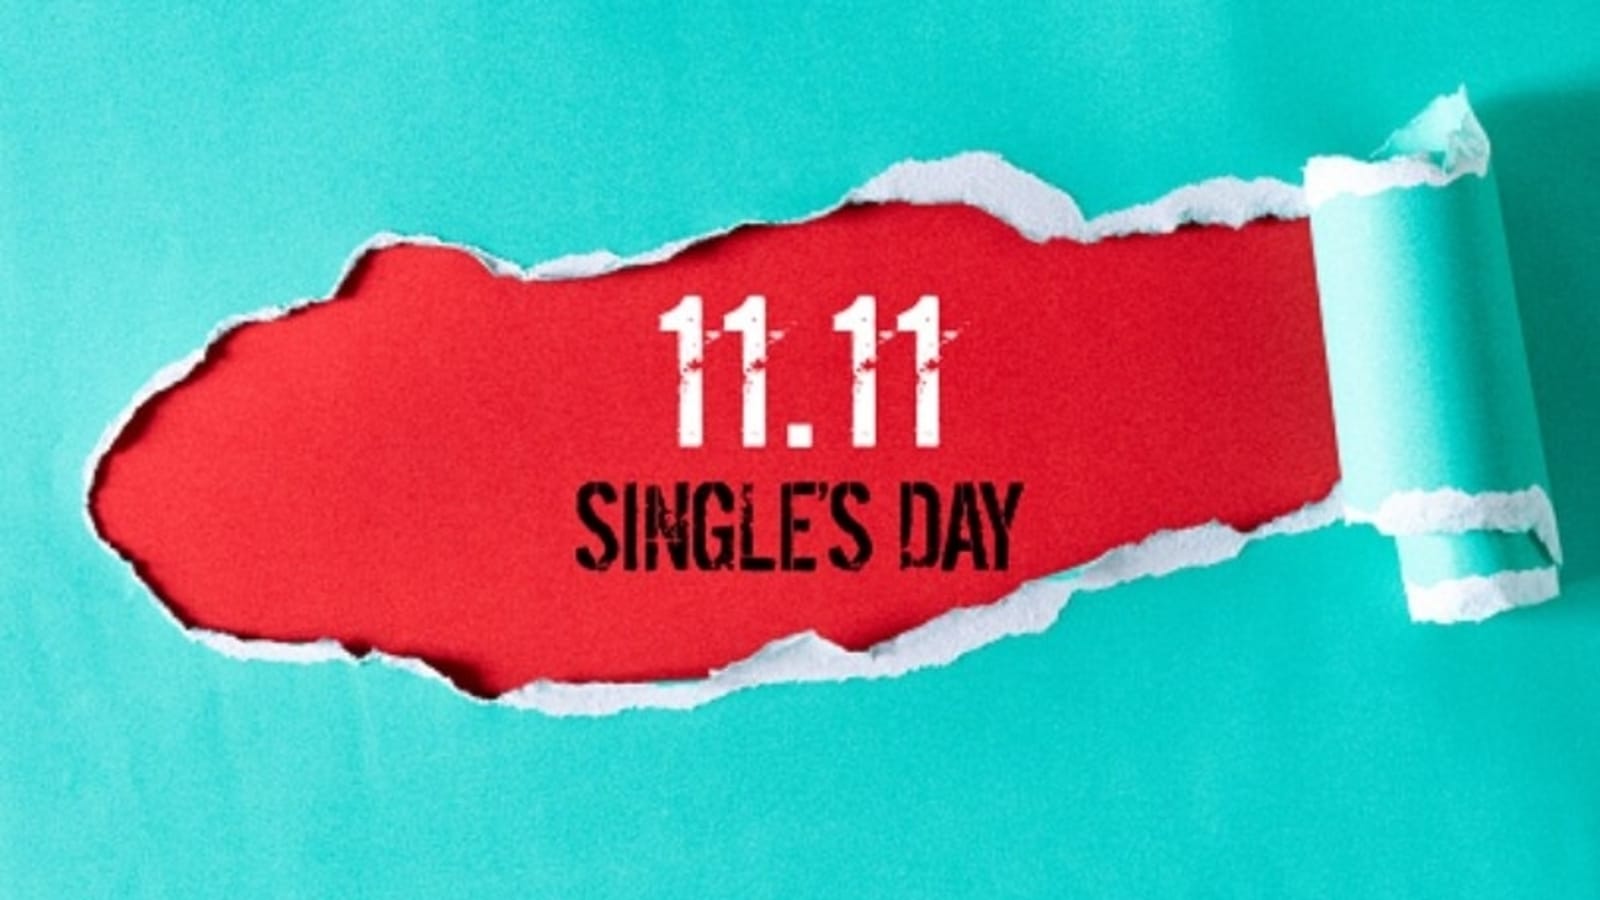 What is Singles' Day? Date, history, significance of the day